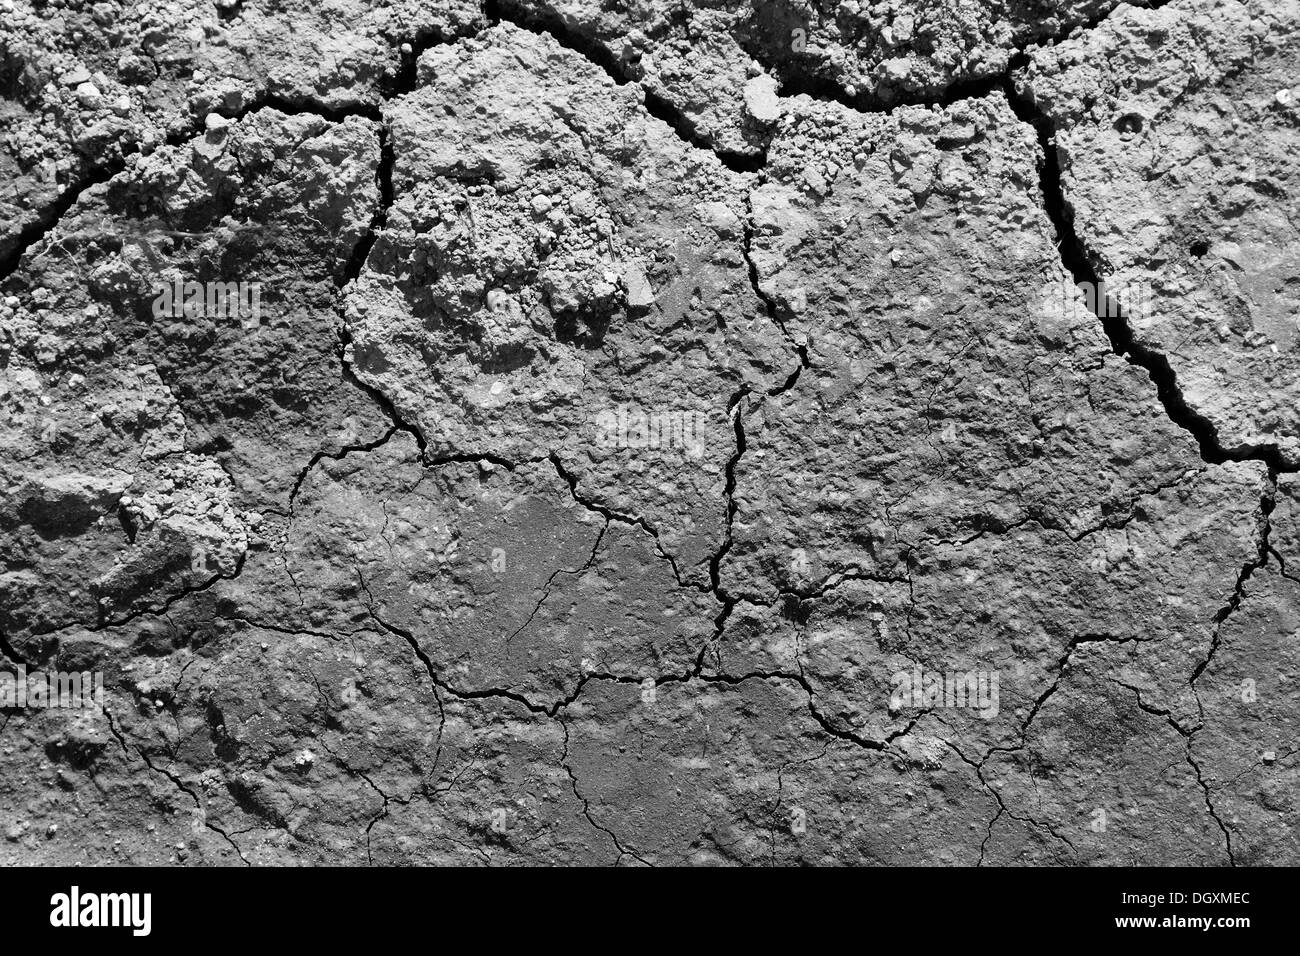 Lines in cracked earth Stock Photo